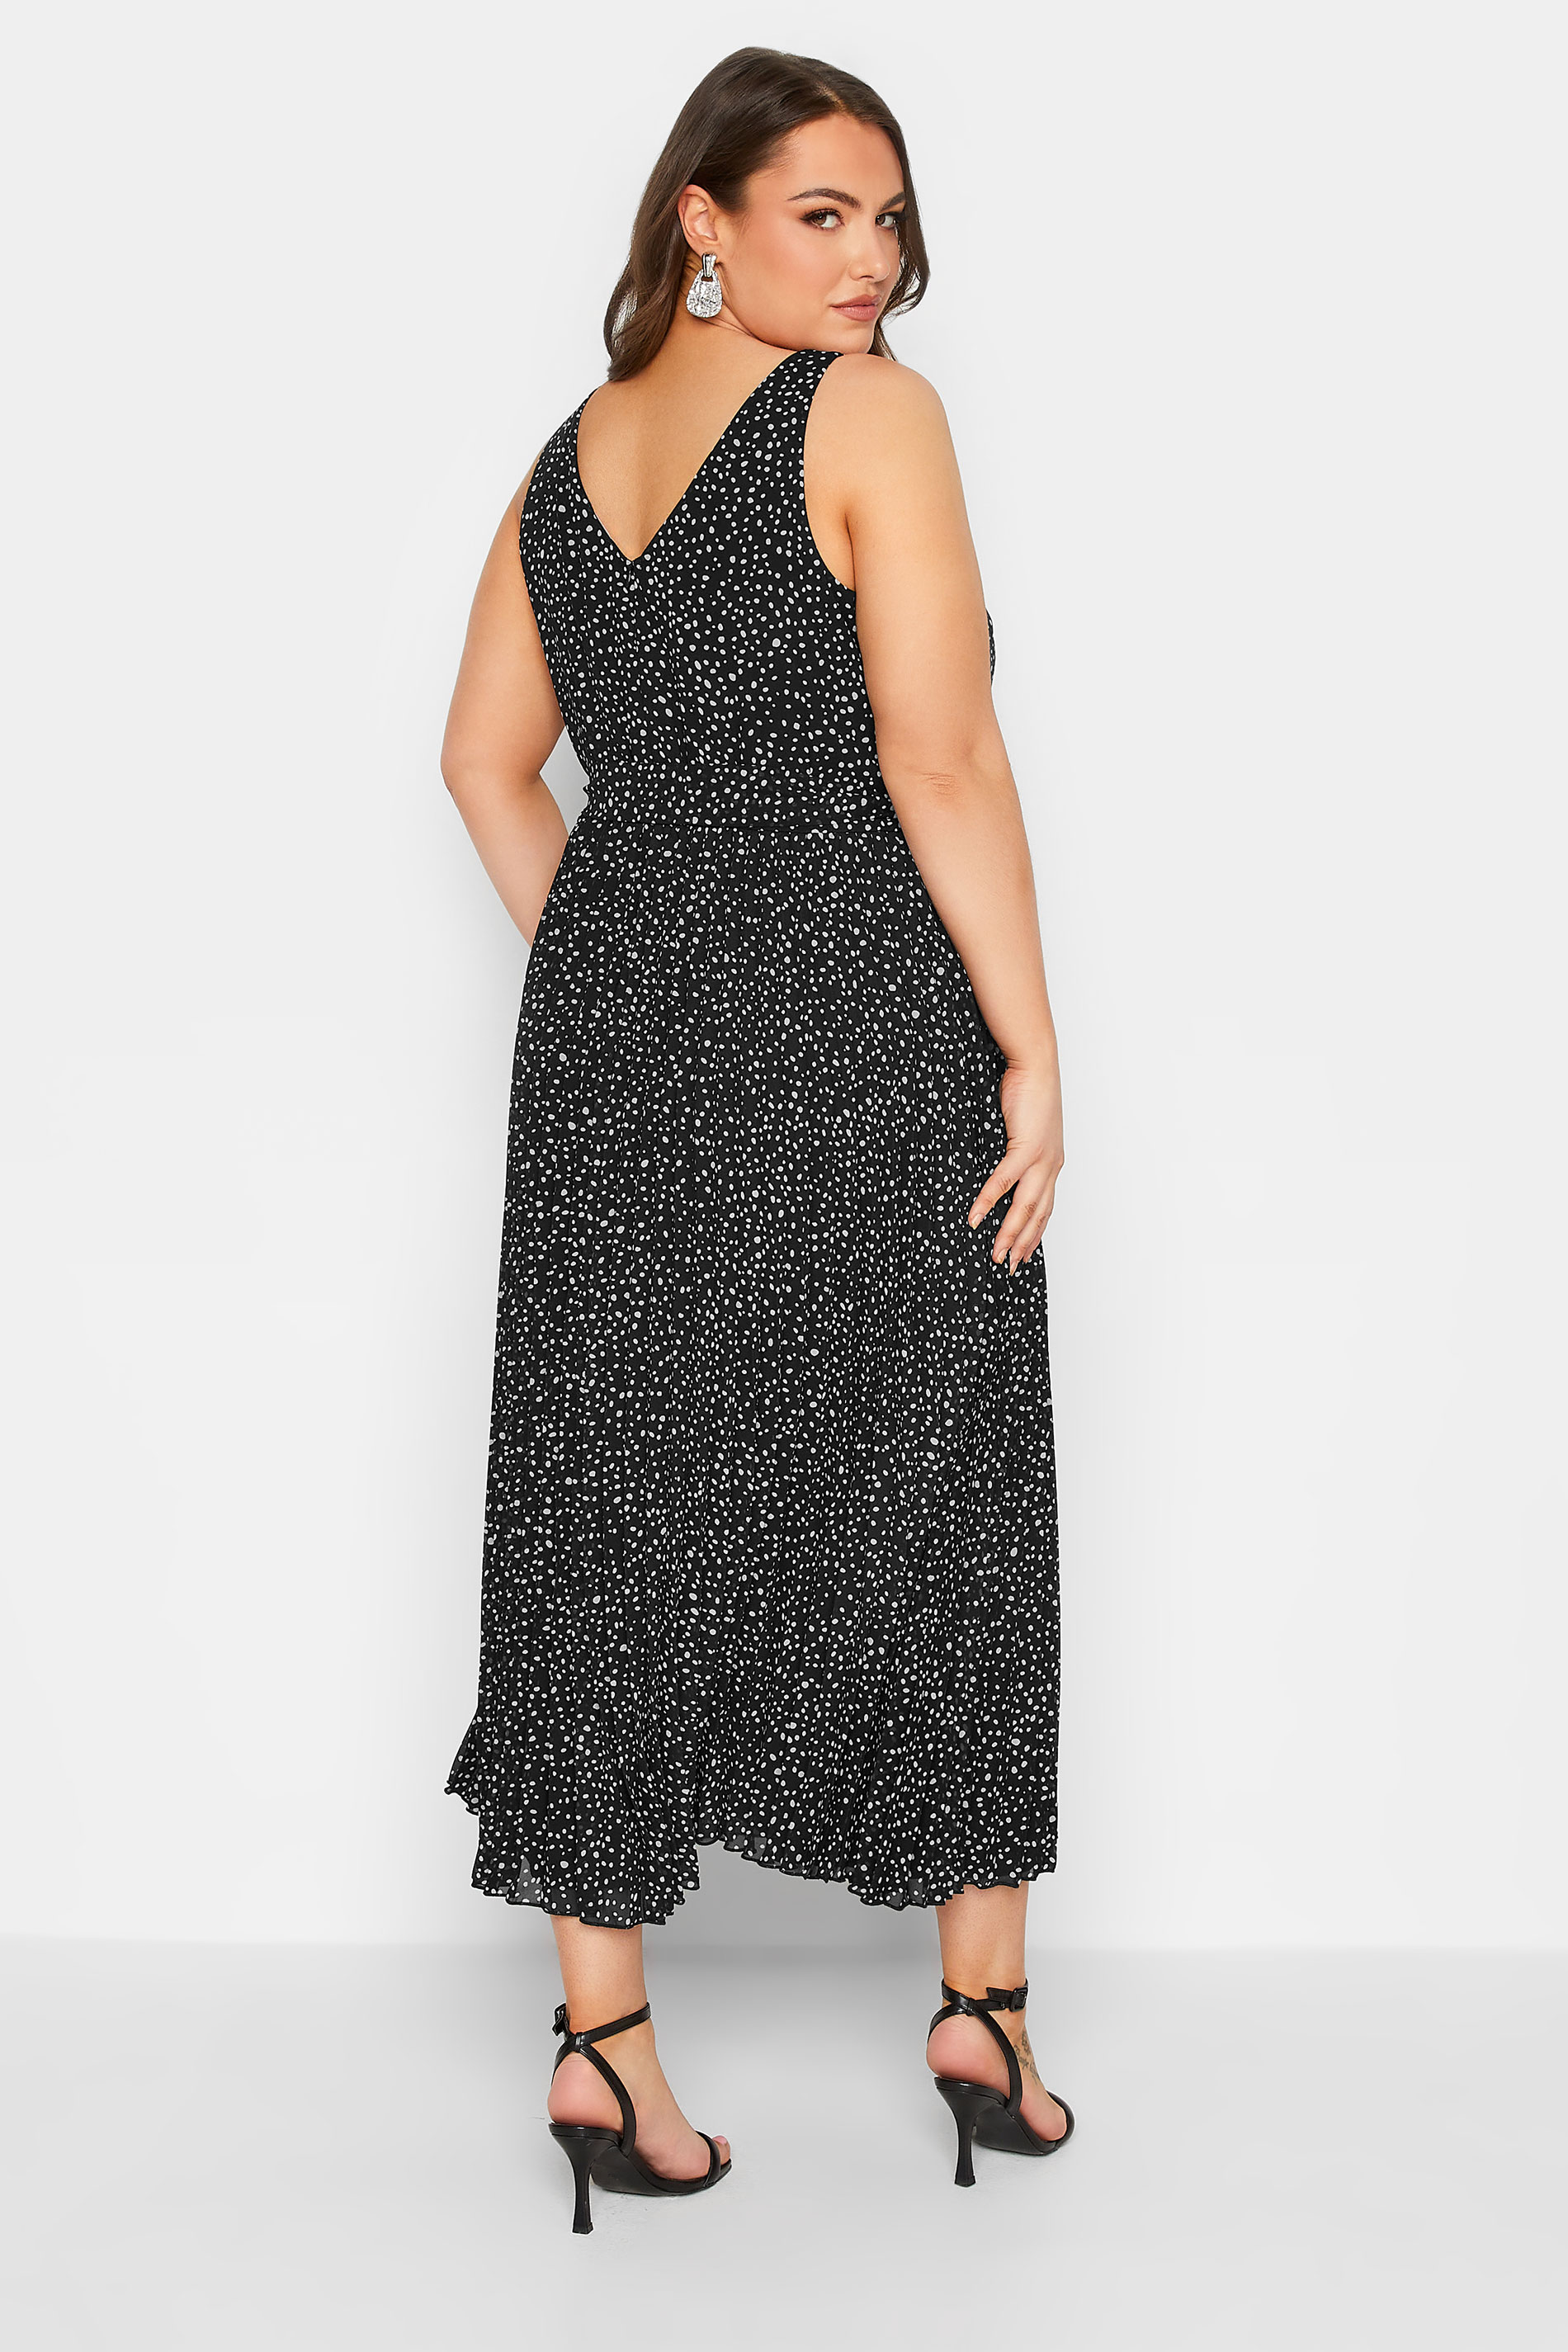 YOURS LONDON Plus Size Black Spot Print Pleated Maxi Dress | Yours Clothing 3